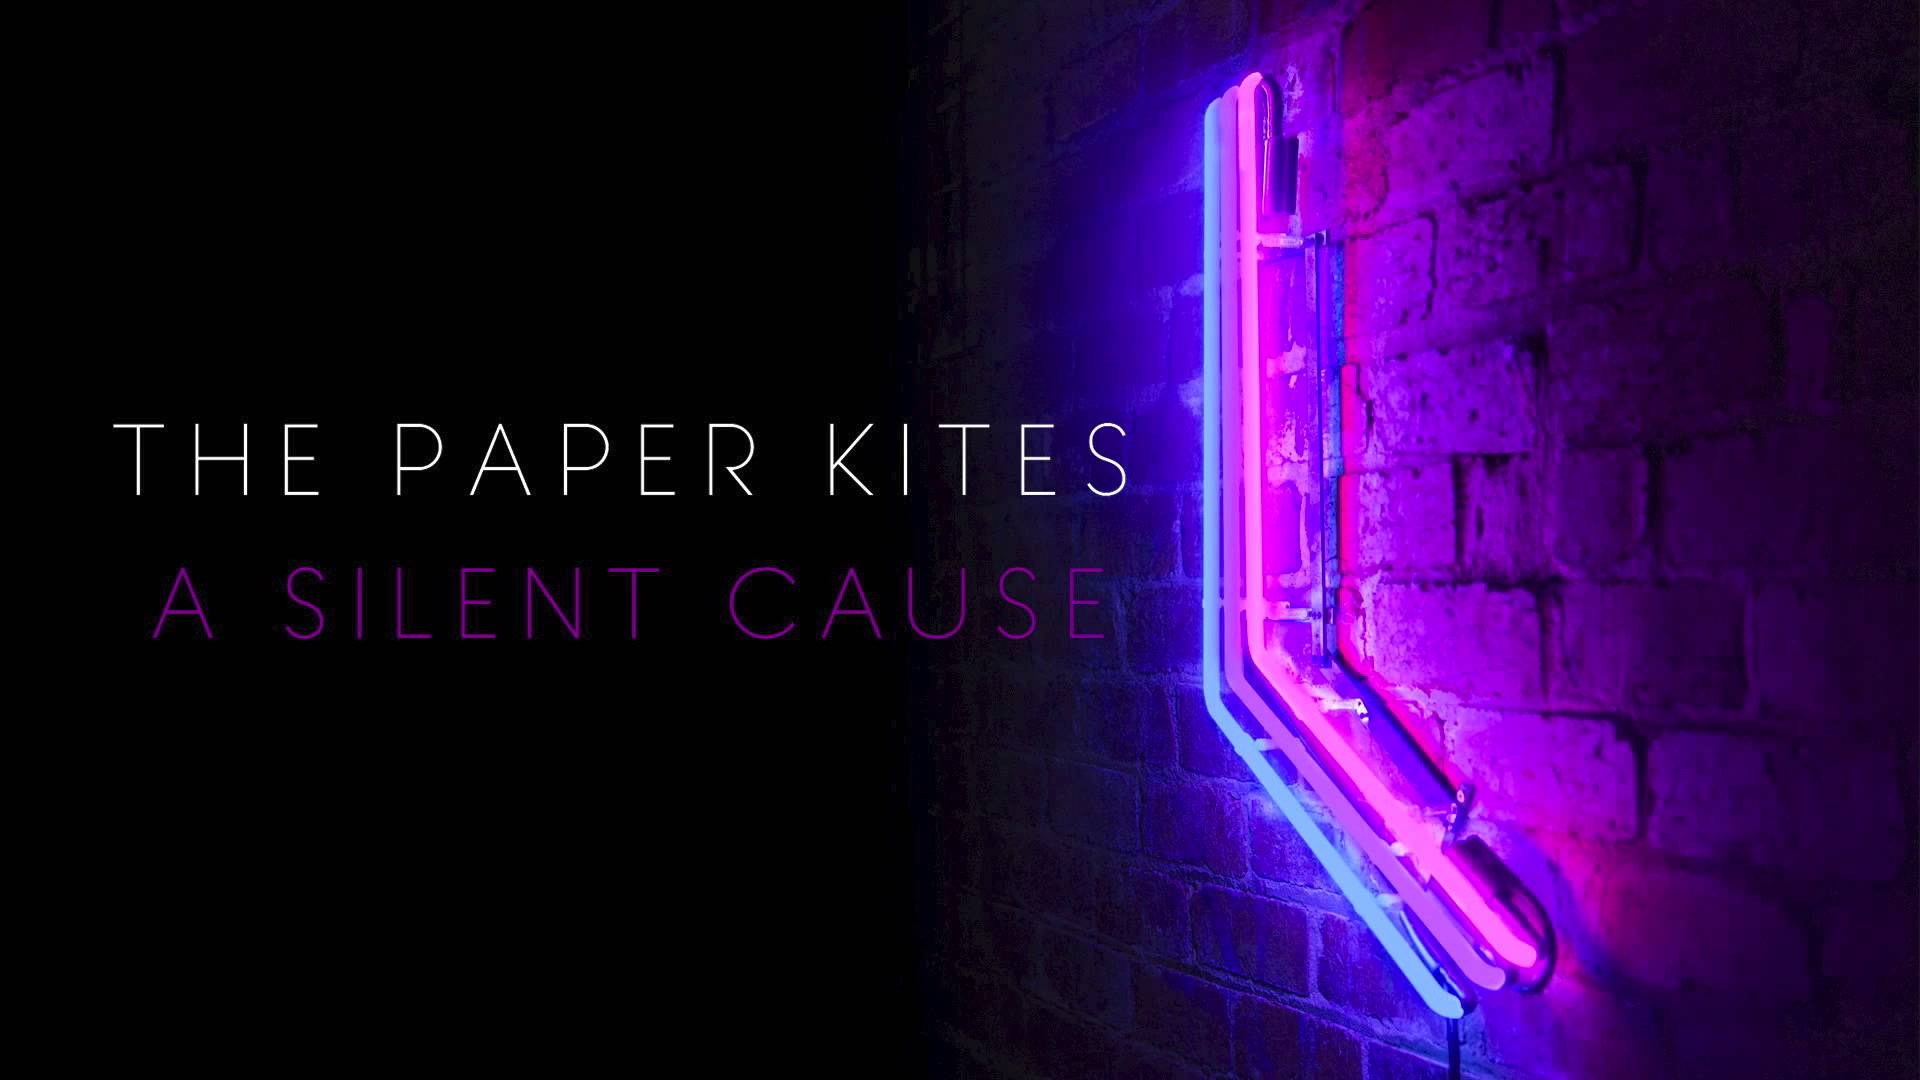 The Paper Kites - A Silent Cause